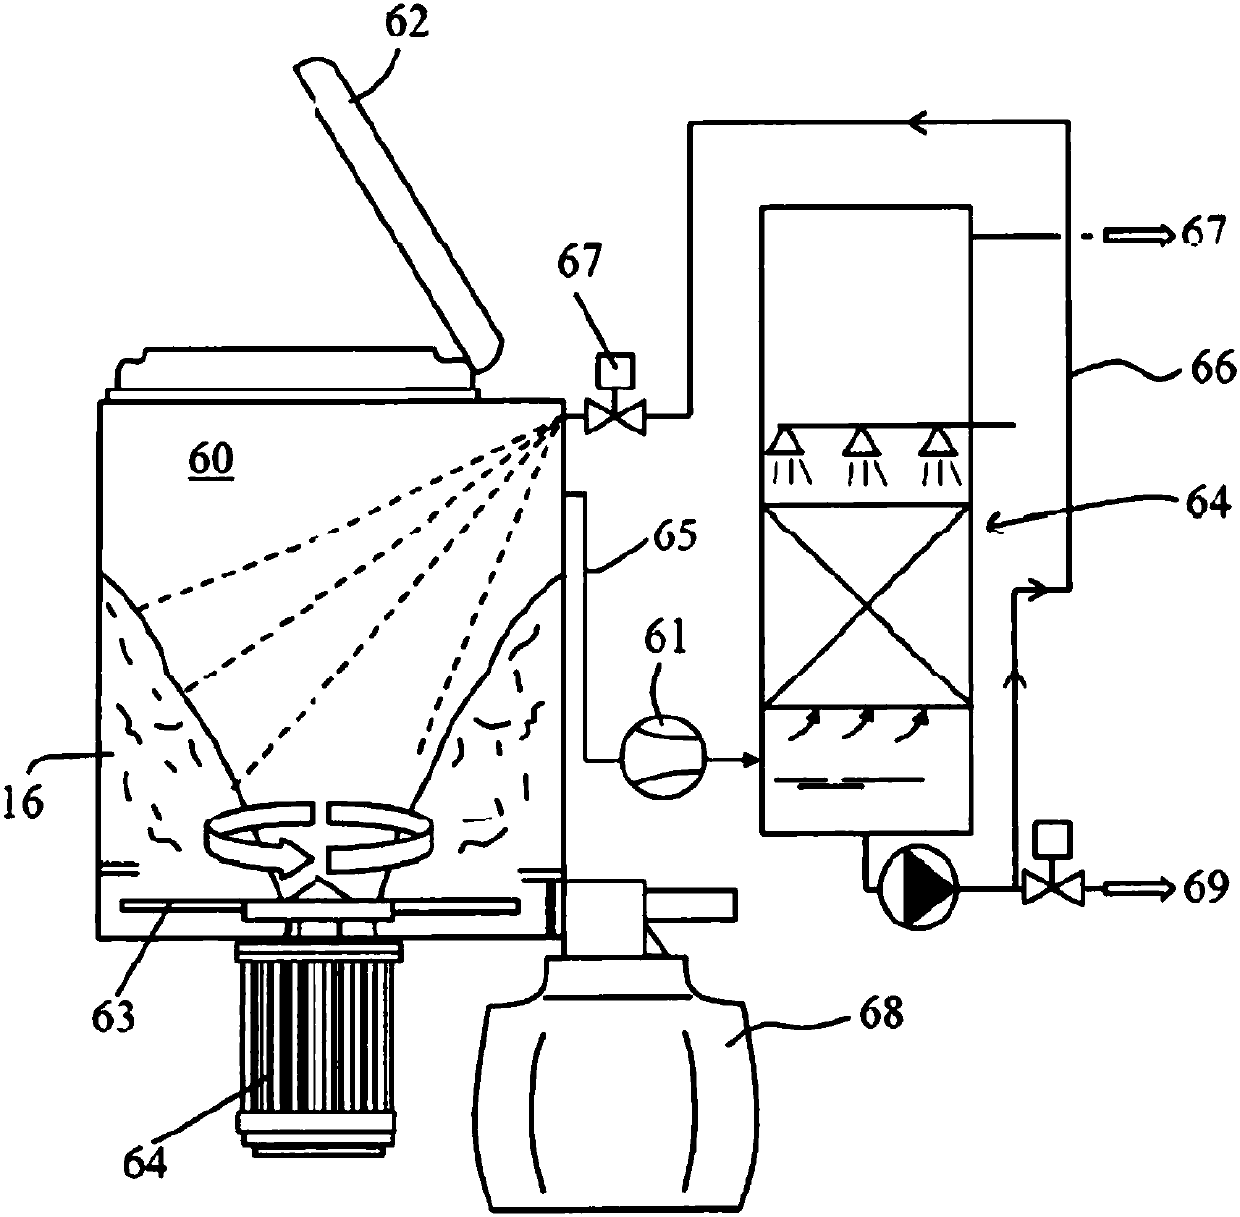 Process for treating solid waste containing an organic fraction